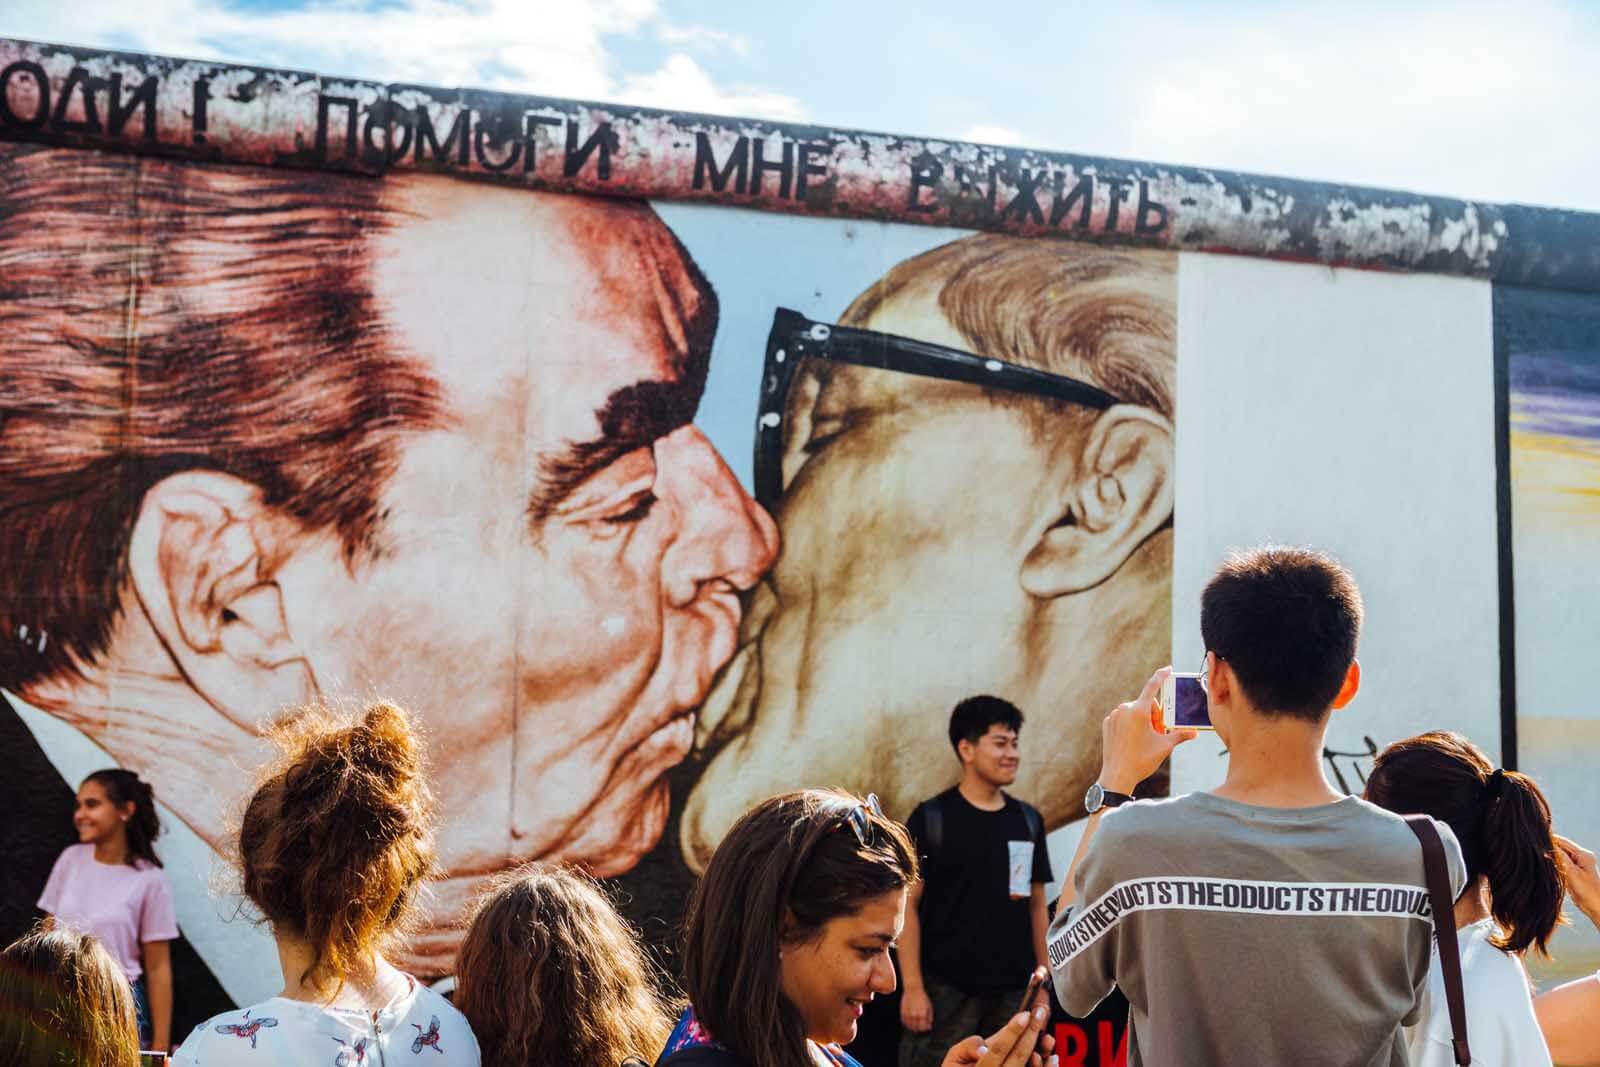 The famous kiss on the Berlin wall